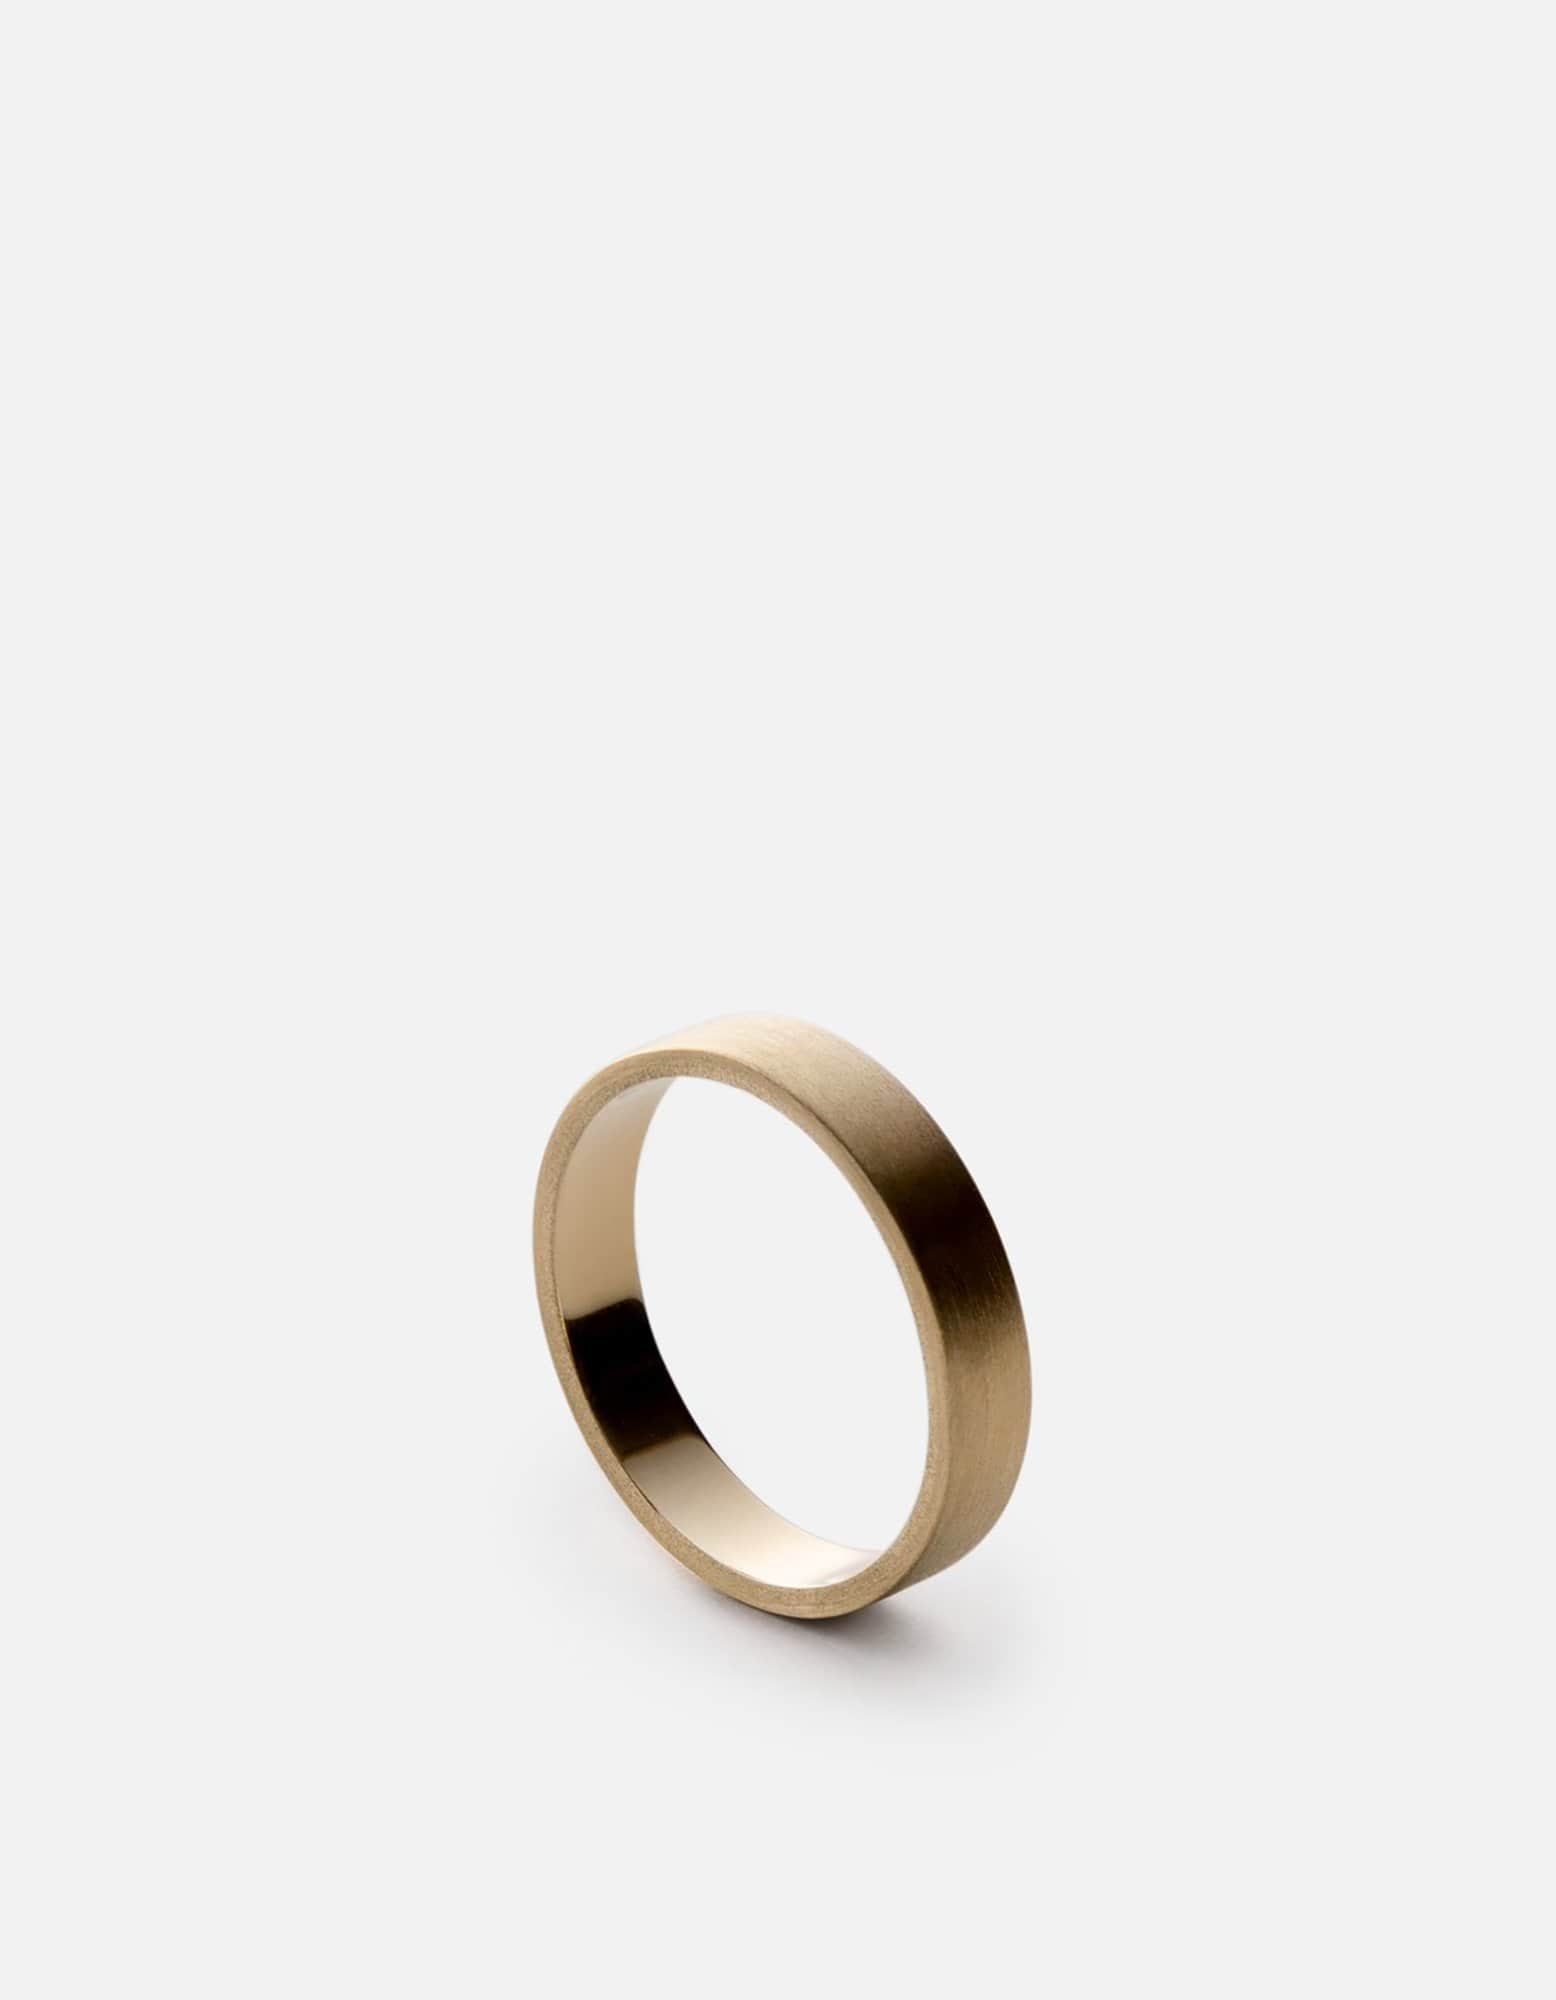 Infinity Wedding Band in 18k Gold Mens Matte Finish Ring, 5mm